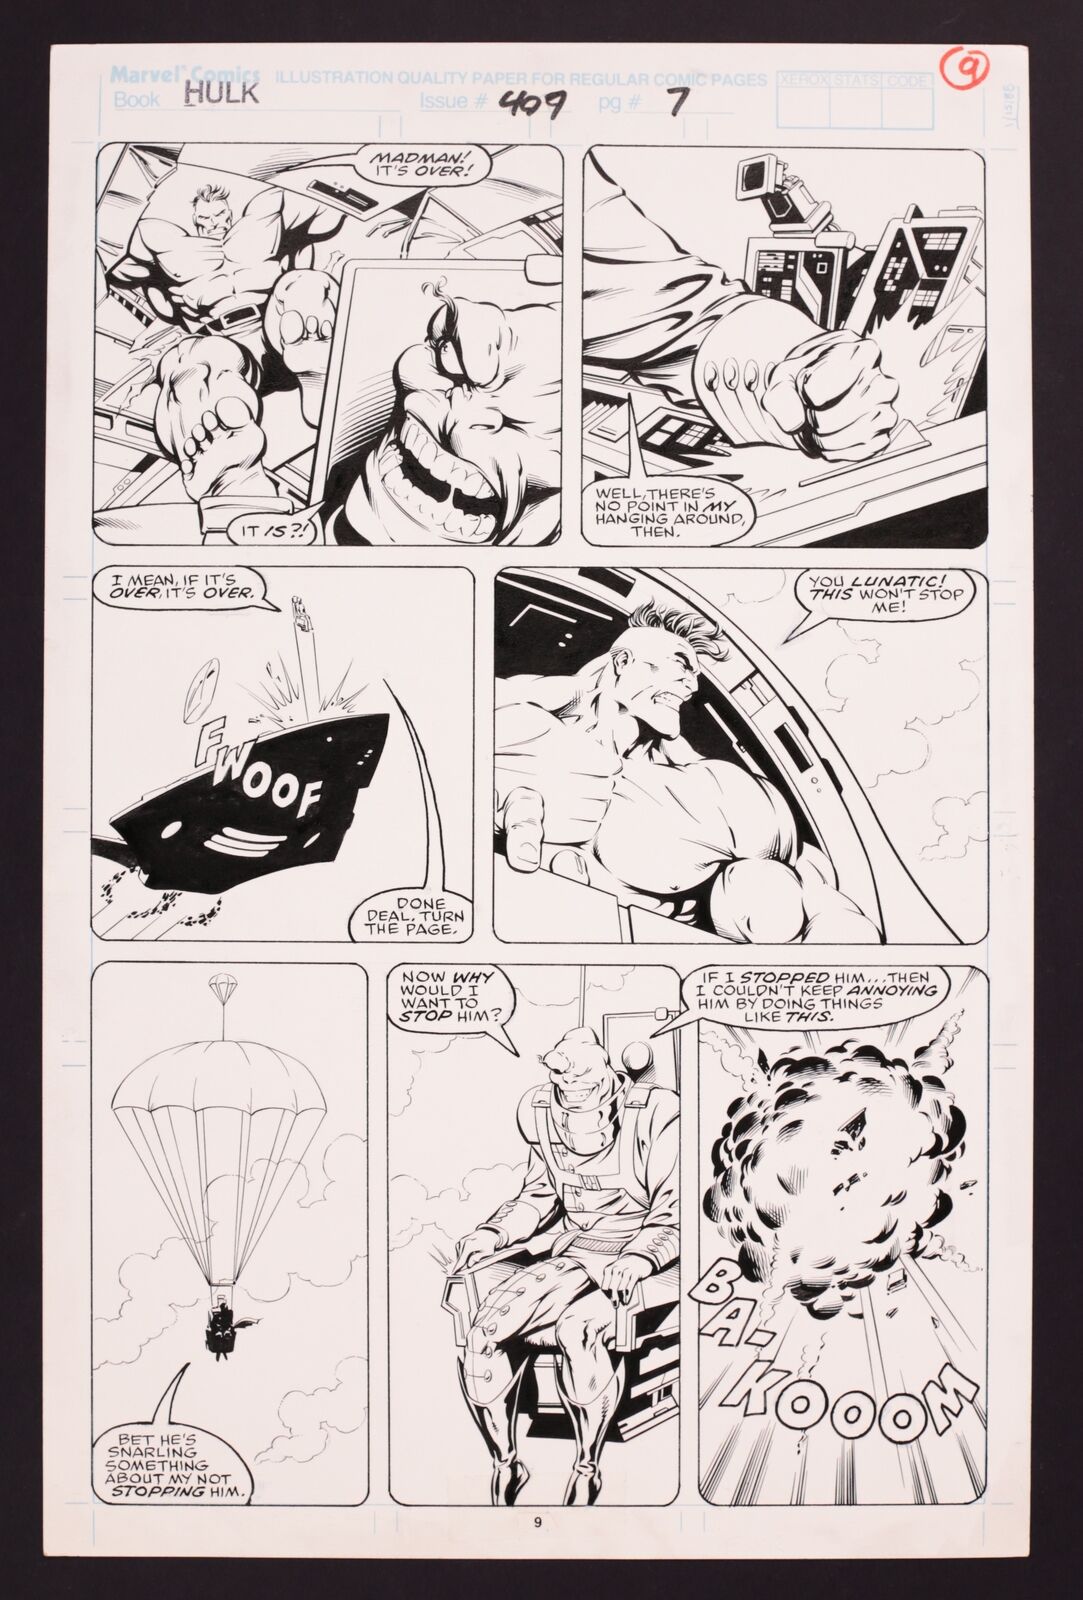 Original Art from Incredible Hulk #409 (1993) Page 9 by Gary Frank and Cam Smith